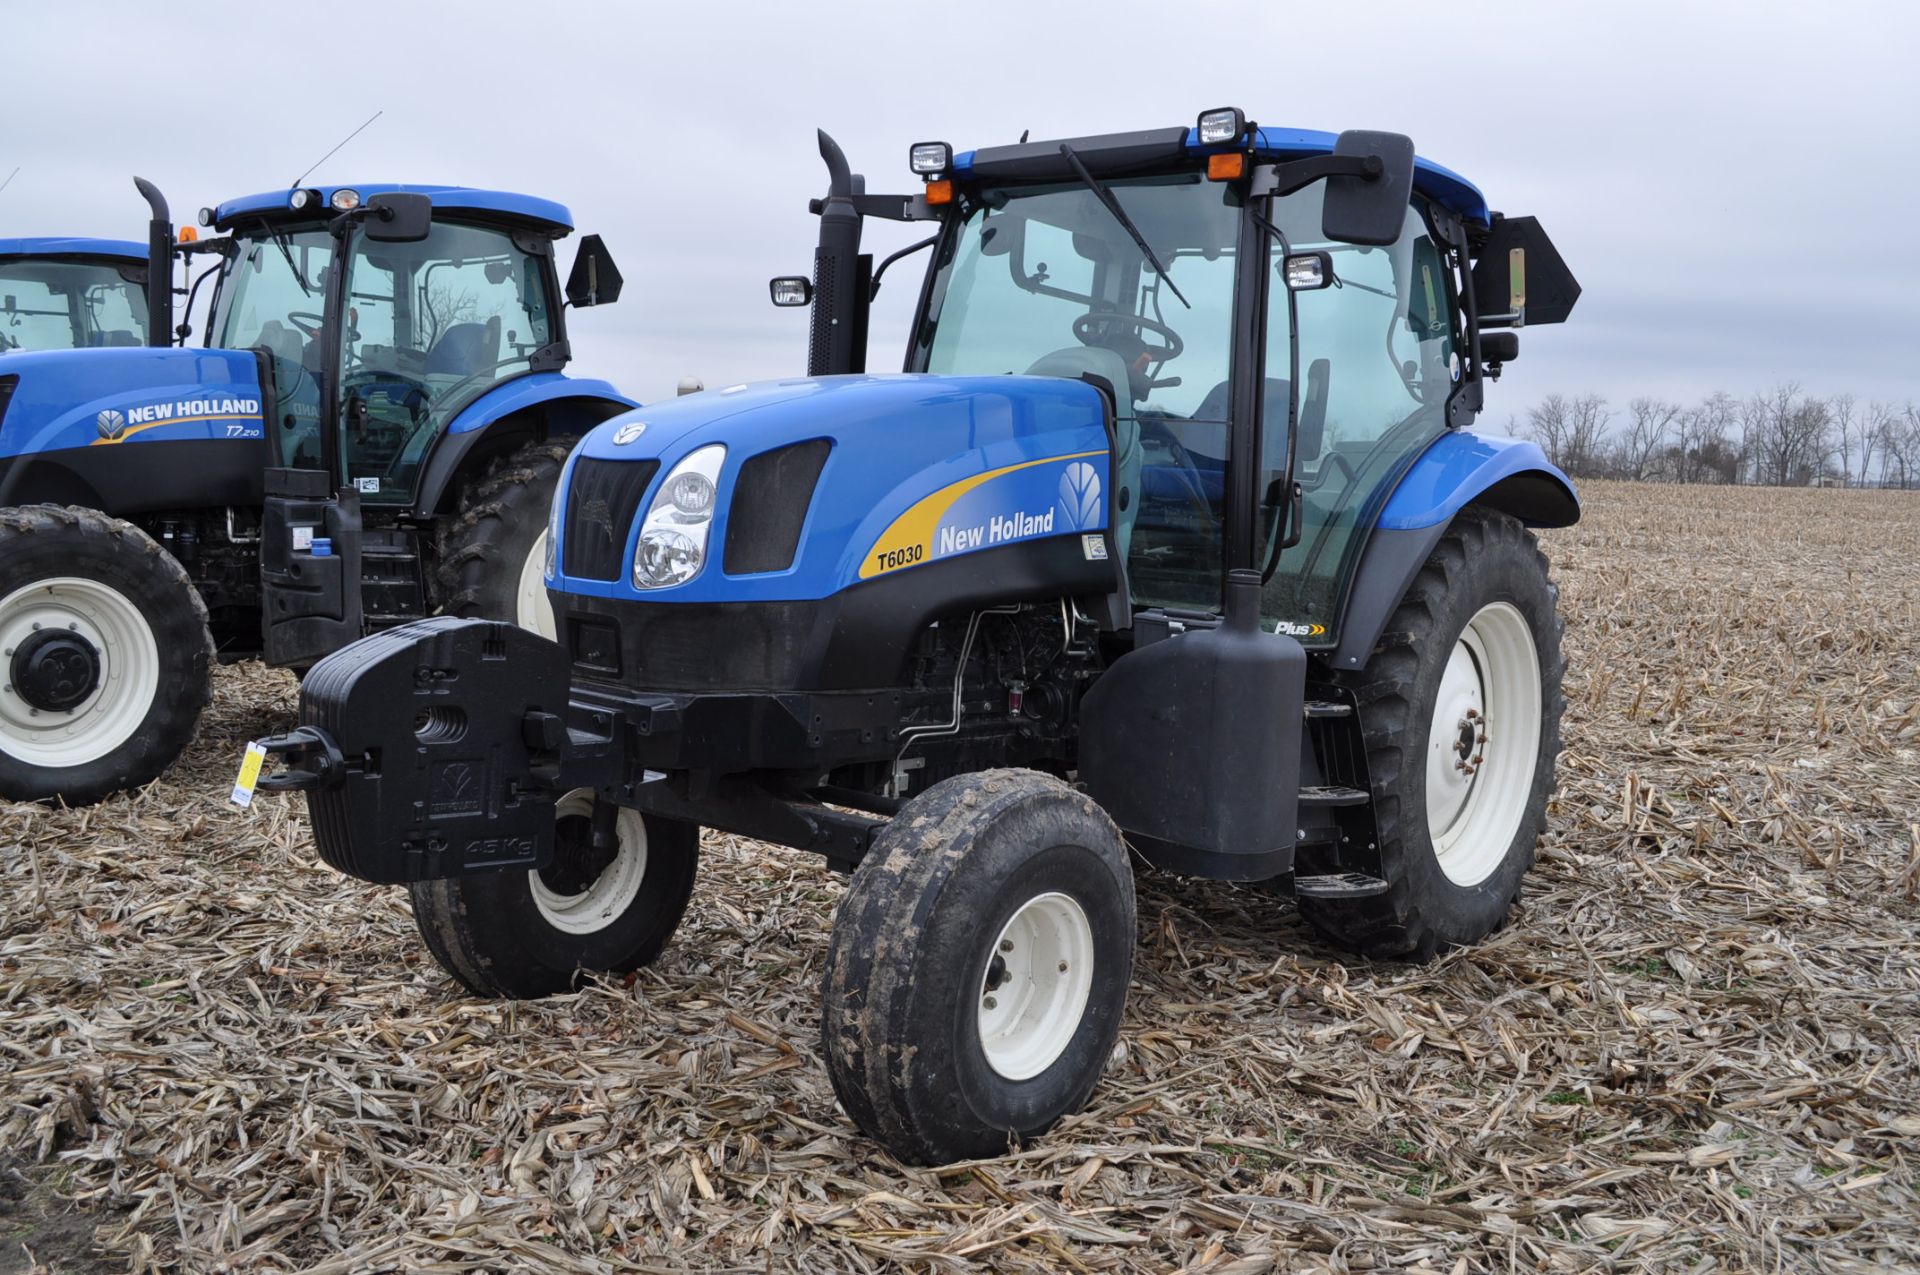 New Holland T6030 tractor, CHA, 16.9 R 38 tires, 11.00-16 front, 6 front wts, 3 hyd remotes, 3 pt,